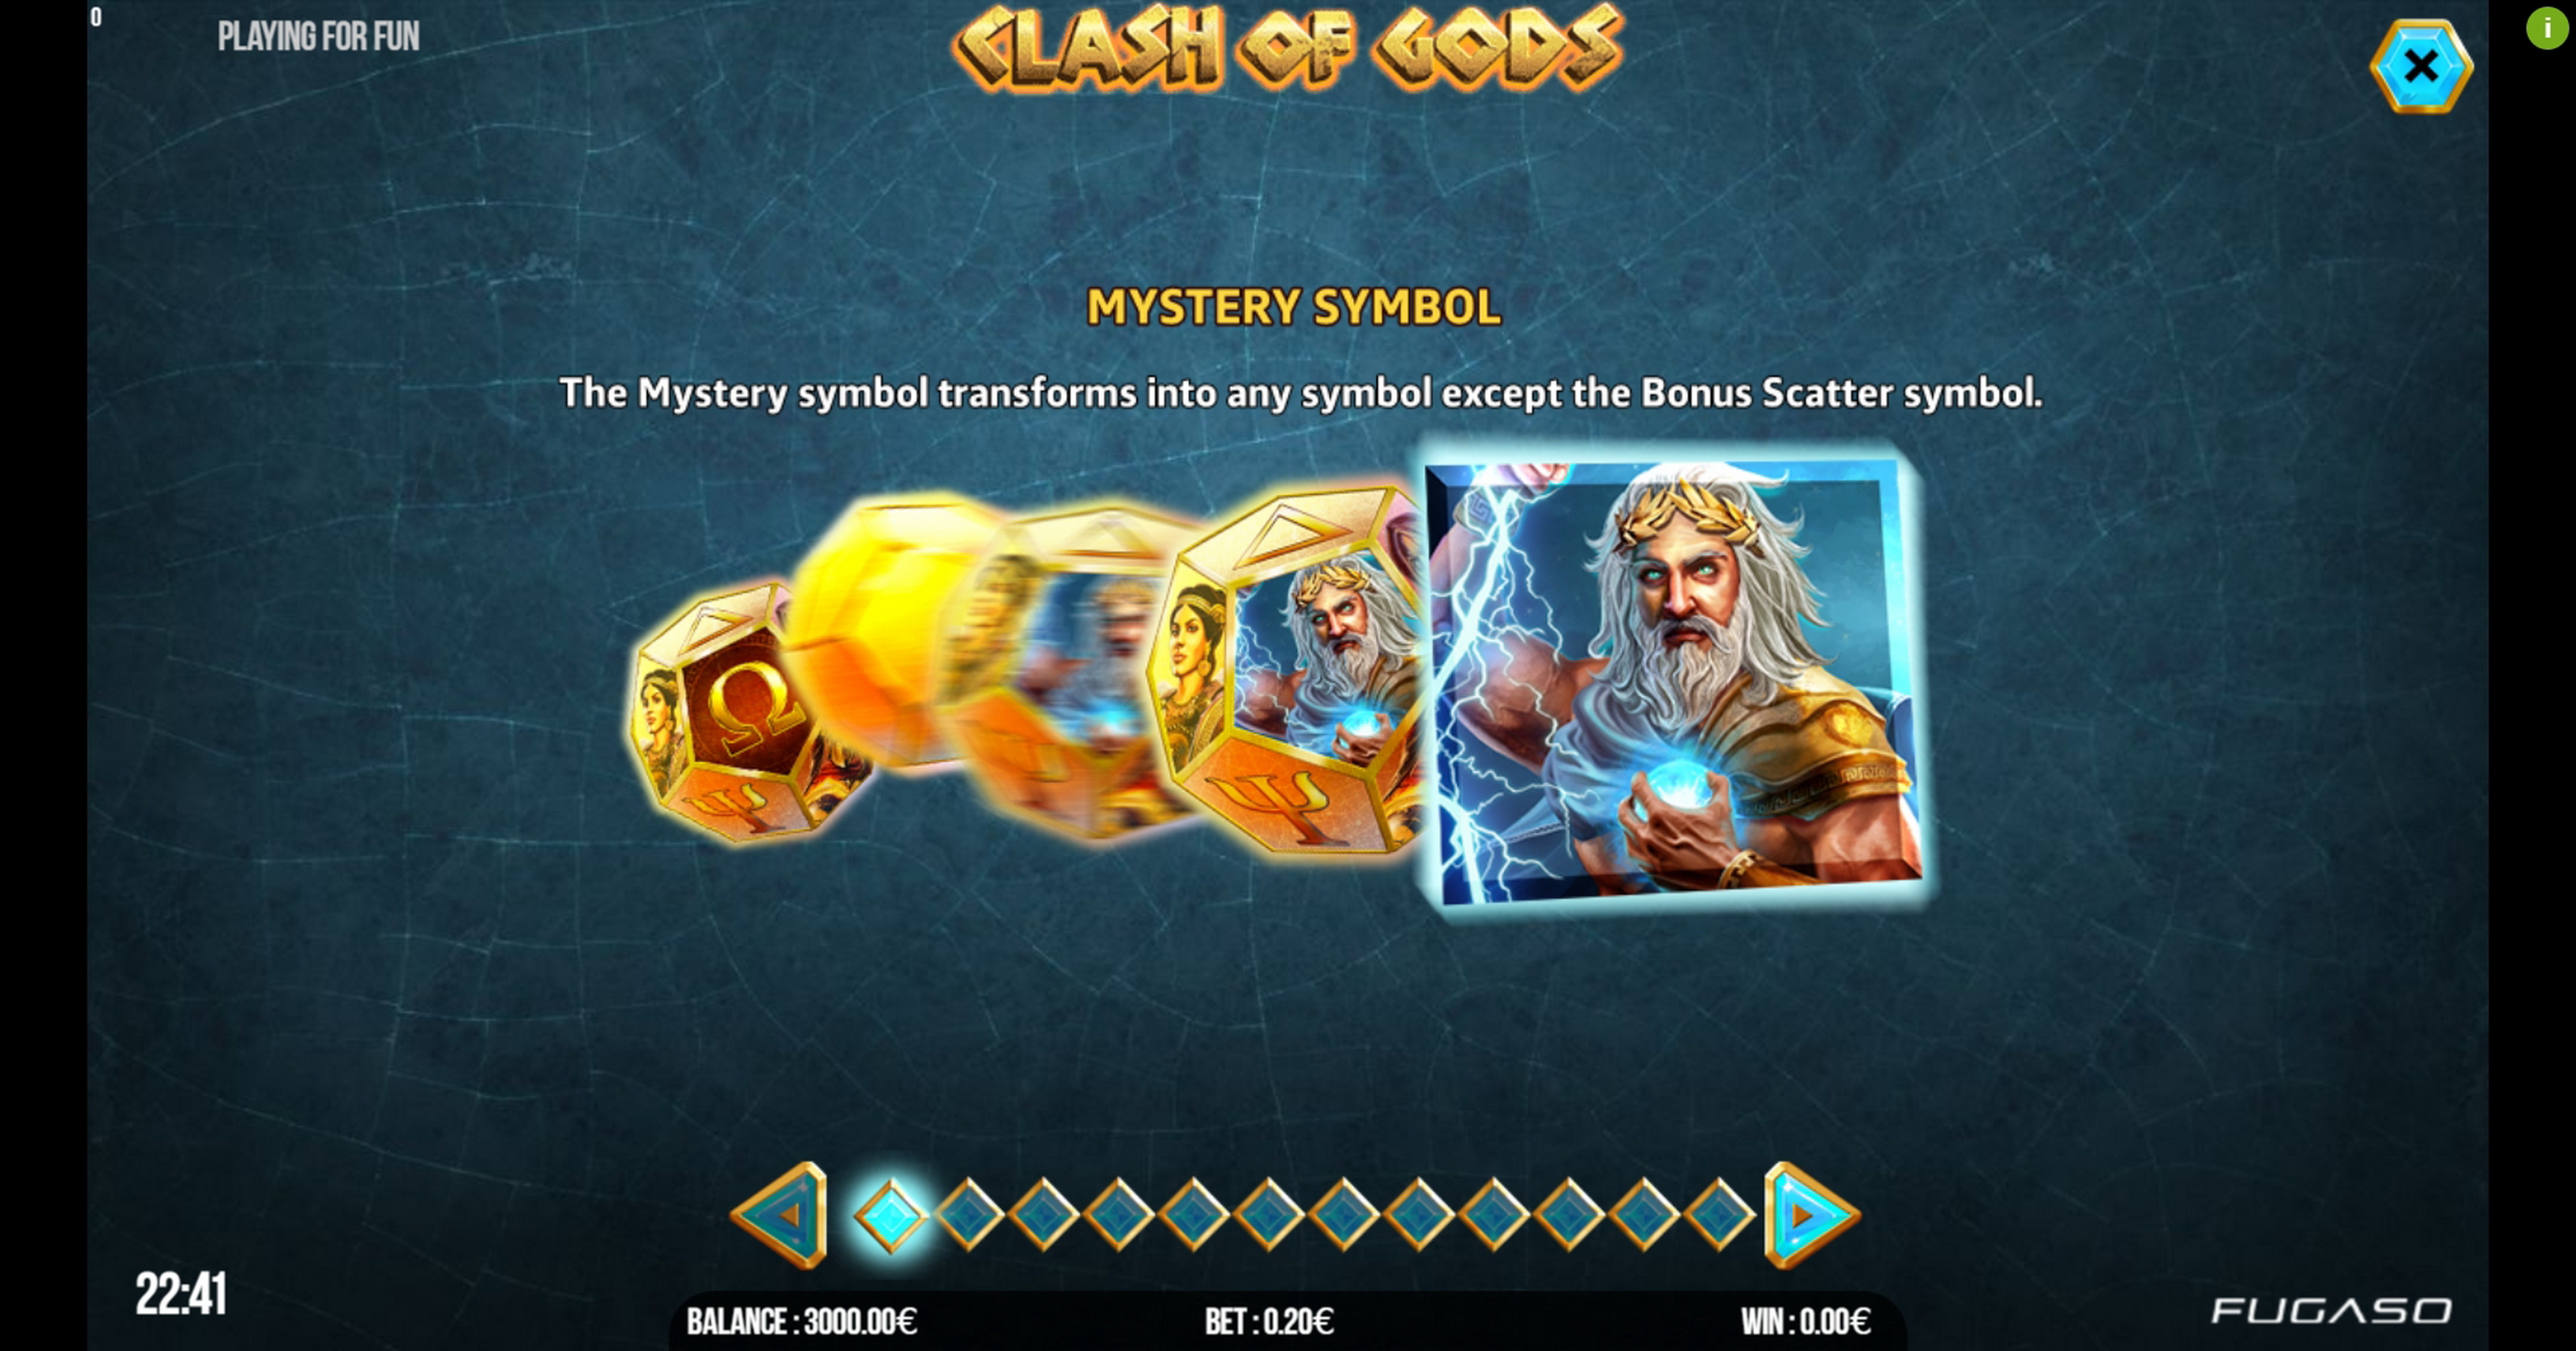 Info of Clash of Gods Slot Game by Fugaso